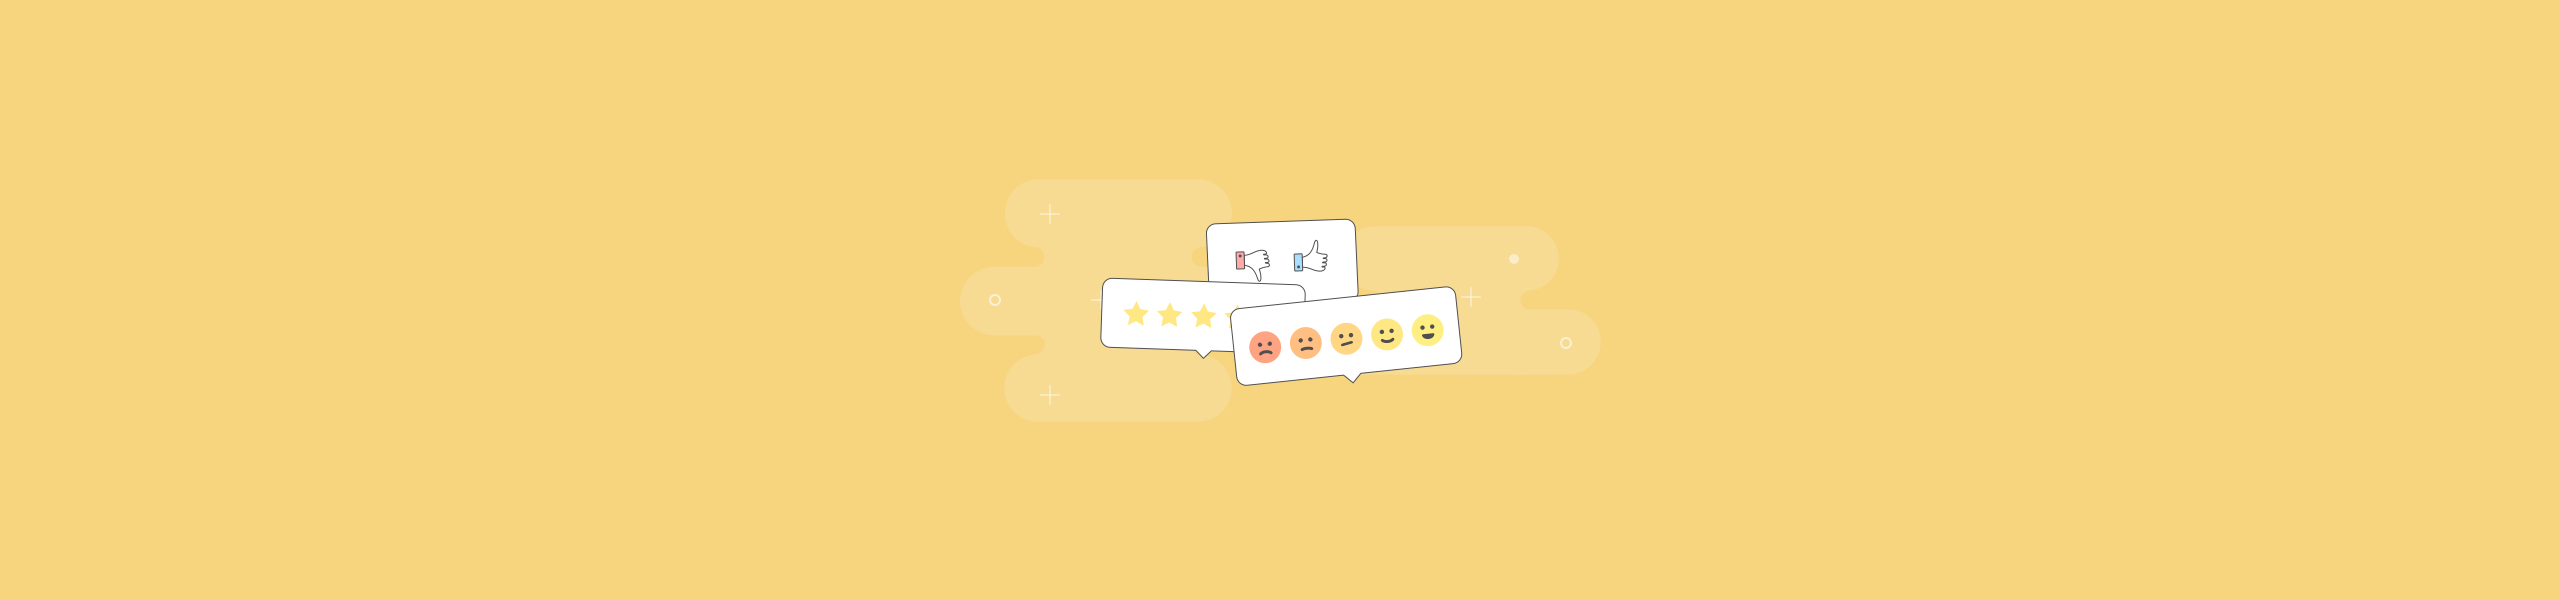 7 Proven Ways to Get Better Customer Feedback (+ Examples) Cover Image